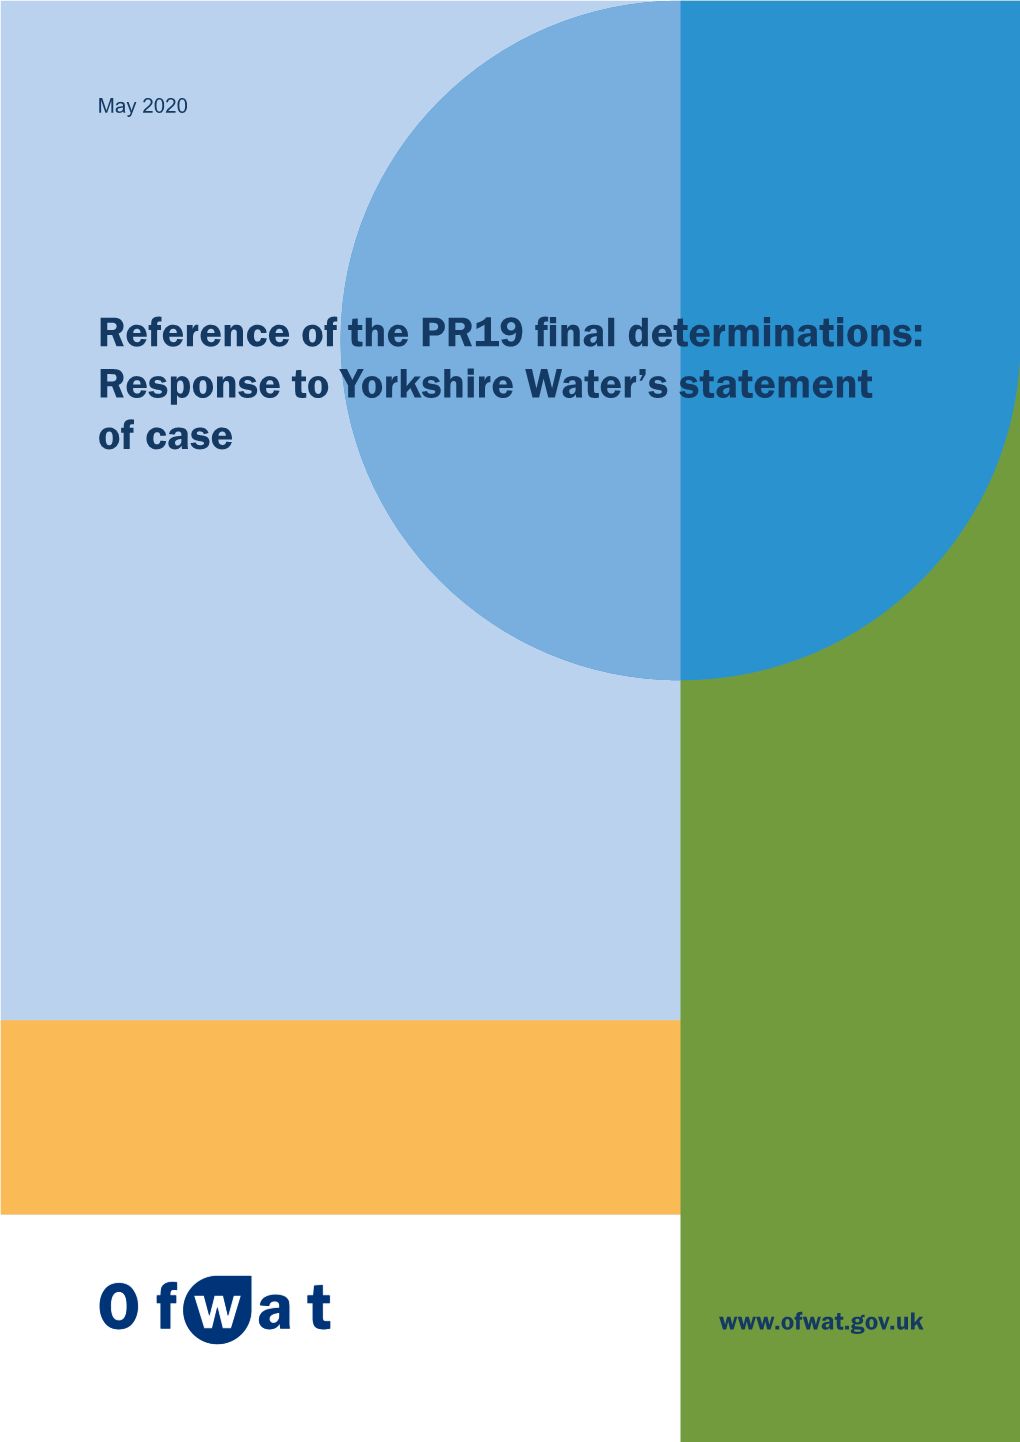 Response to Yorkshire Water's Statement of Case